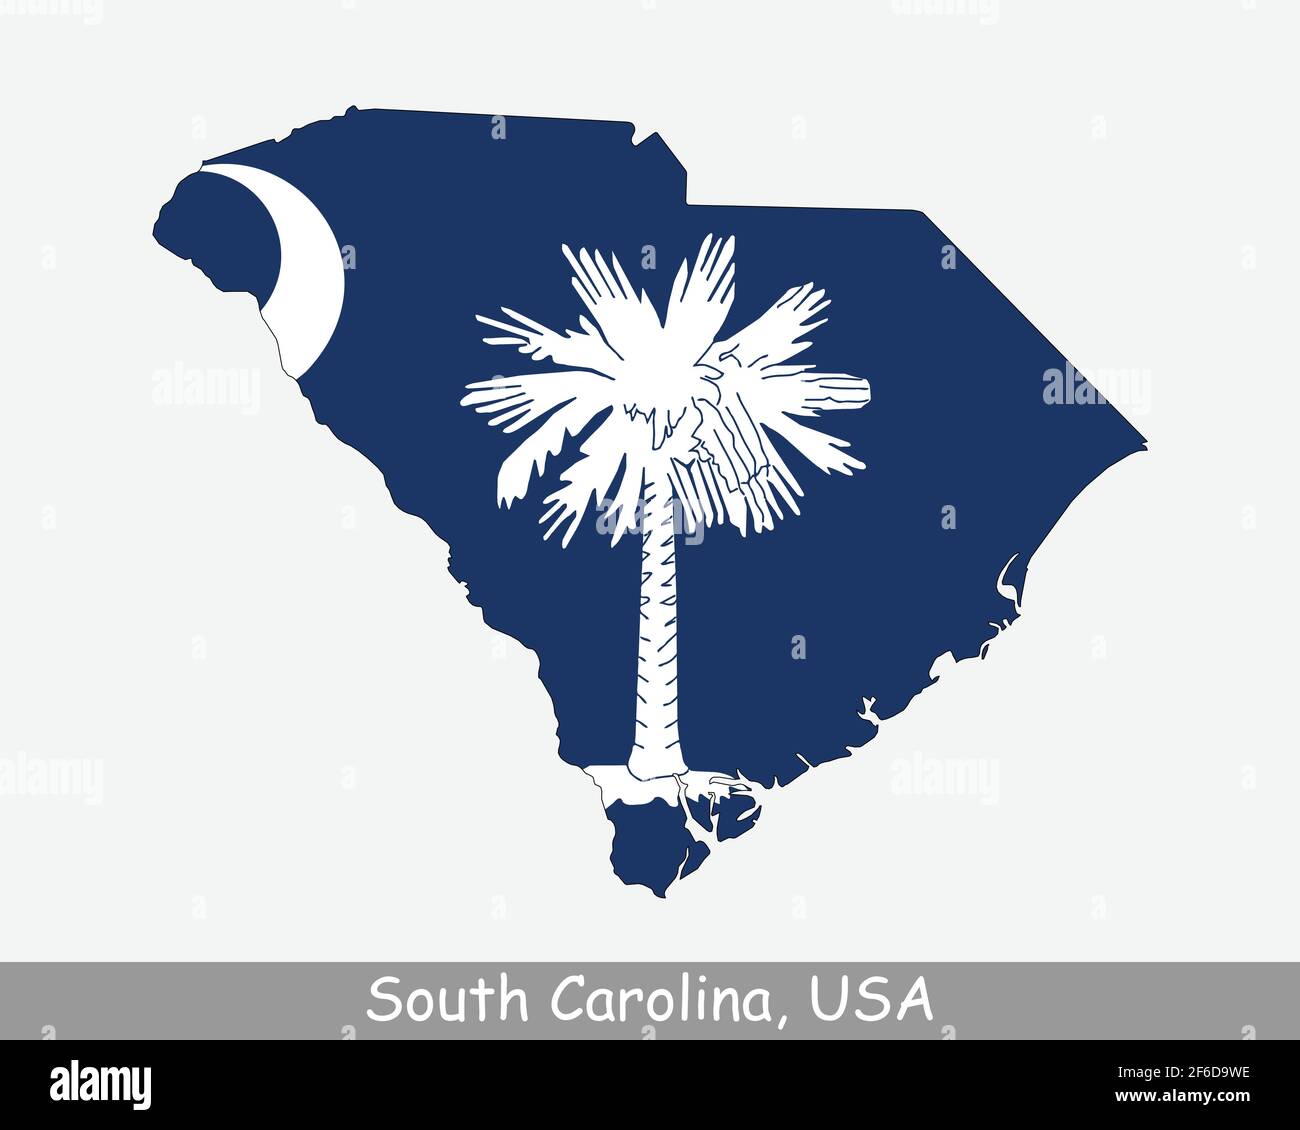 South Carolina Map Flag. Map of SC, USA with the state flag isolated on a white background. United States, America, American, United States of America Stock Vector